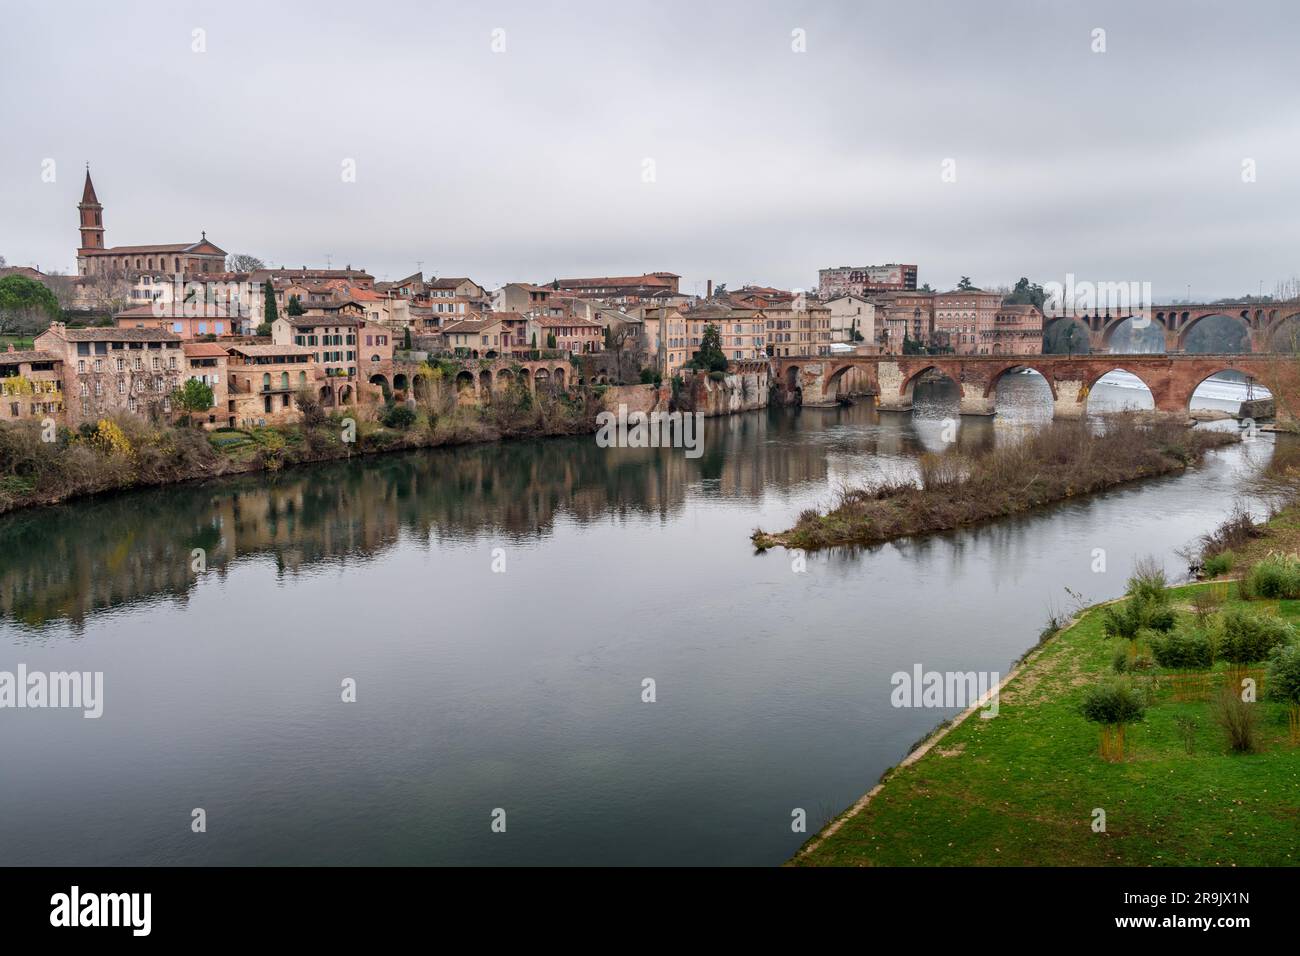 View of Albi, the city and historic buildings from the River Tarn, the Pont Vieux and an island in the stream. Stock Photo